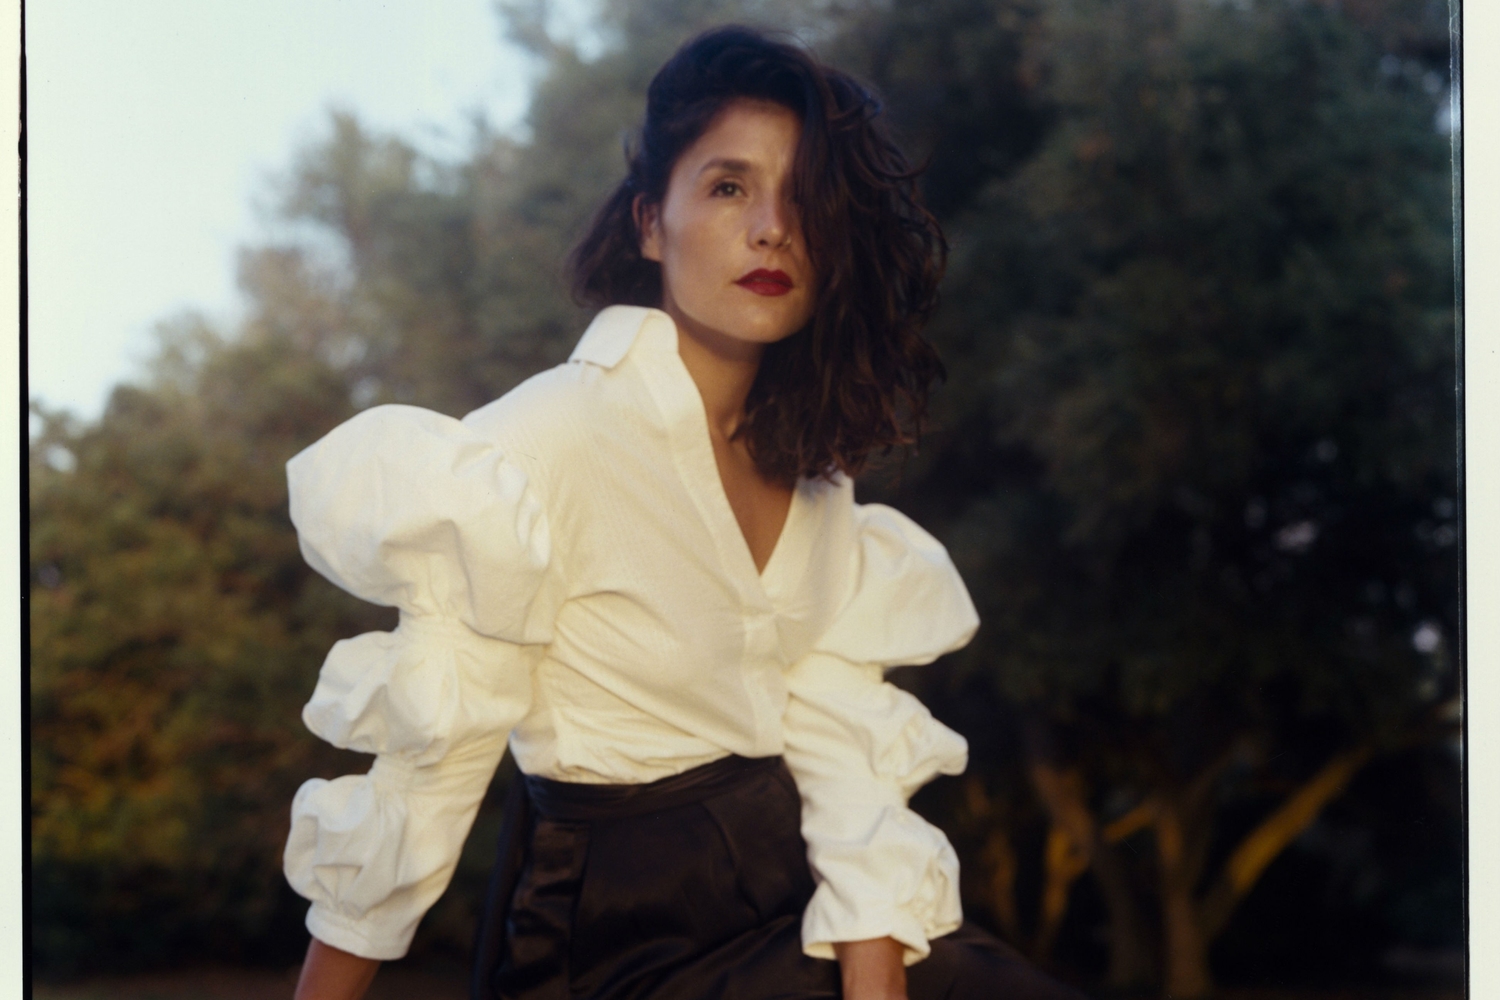 Jessie Ware and Joe Mount team up for ‘Adore You’